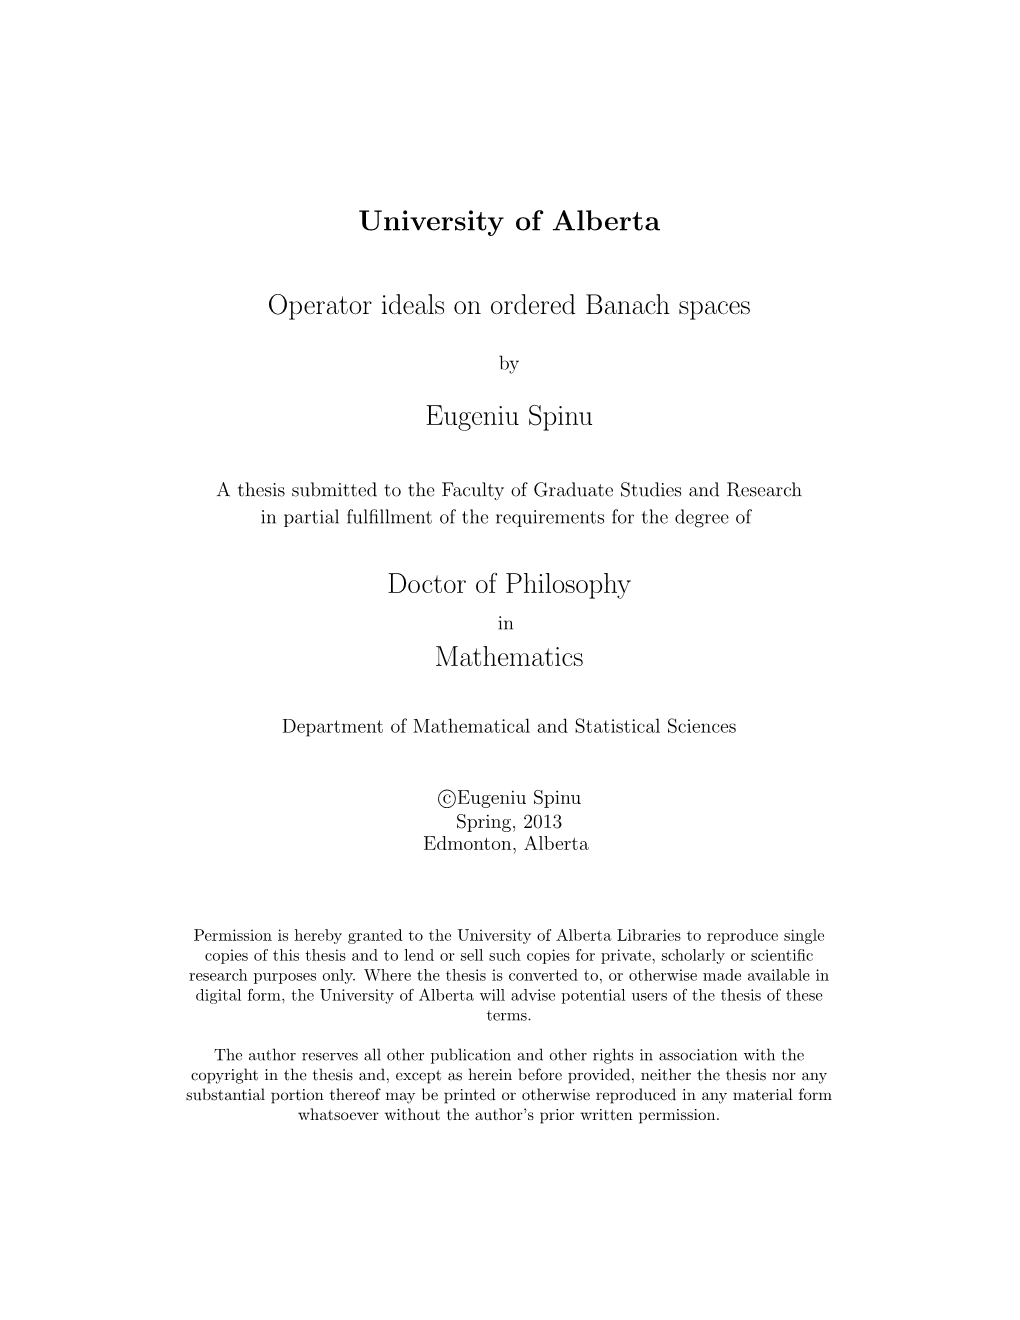 University of Alberta Operator Ideals on Ordered Banach Spaces